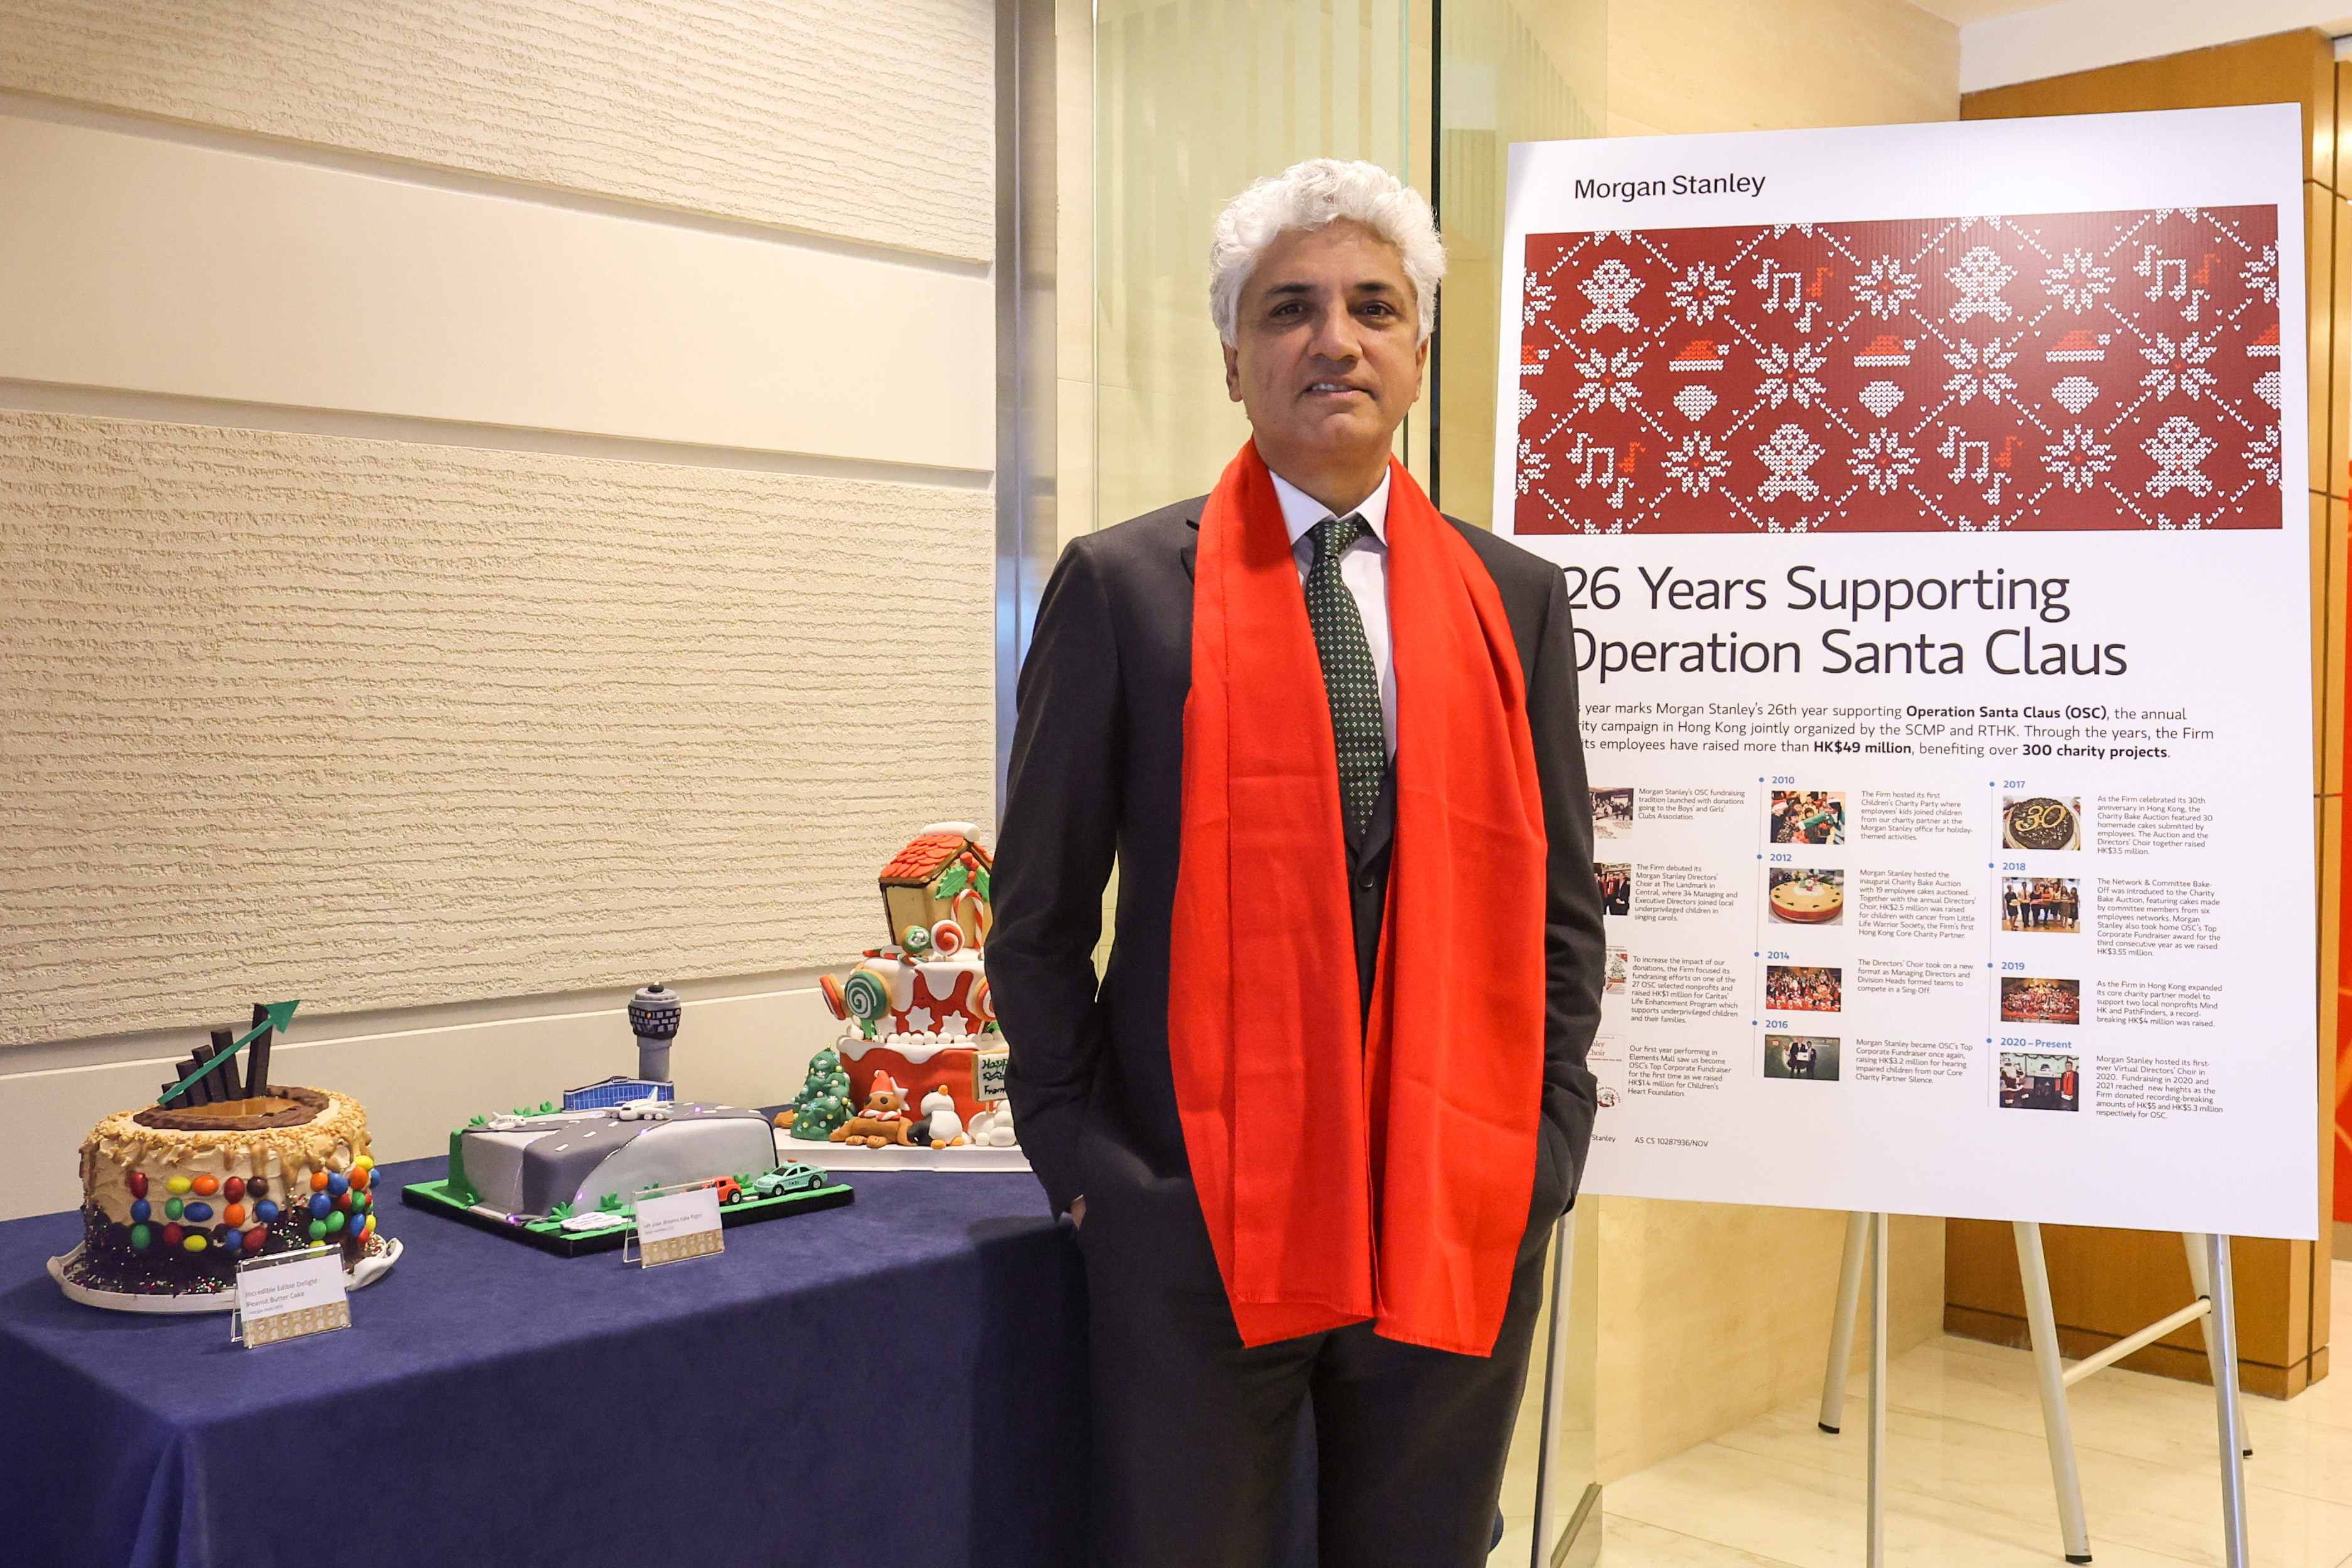 Gokul Laroia, CEO Asia-Pacific of Morgan Stanley, with some of the cakes made to raise funds for Operation Santa Claus.
Photo: Edmond So